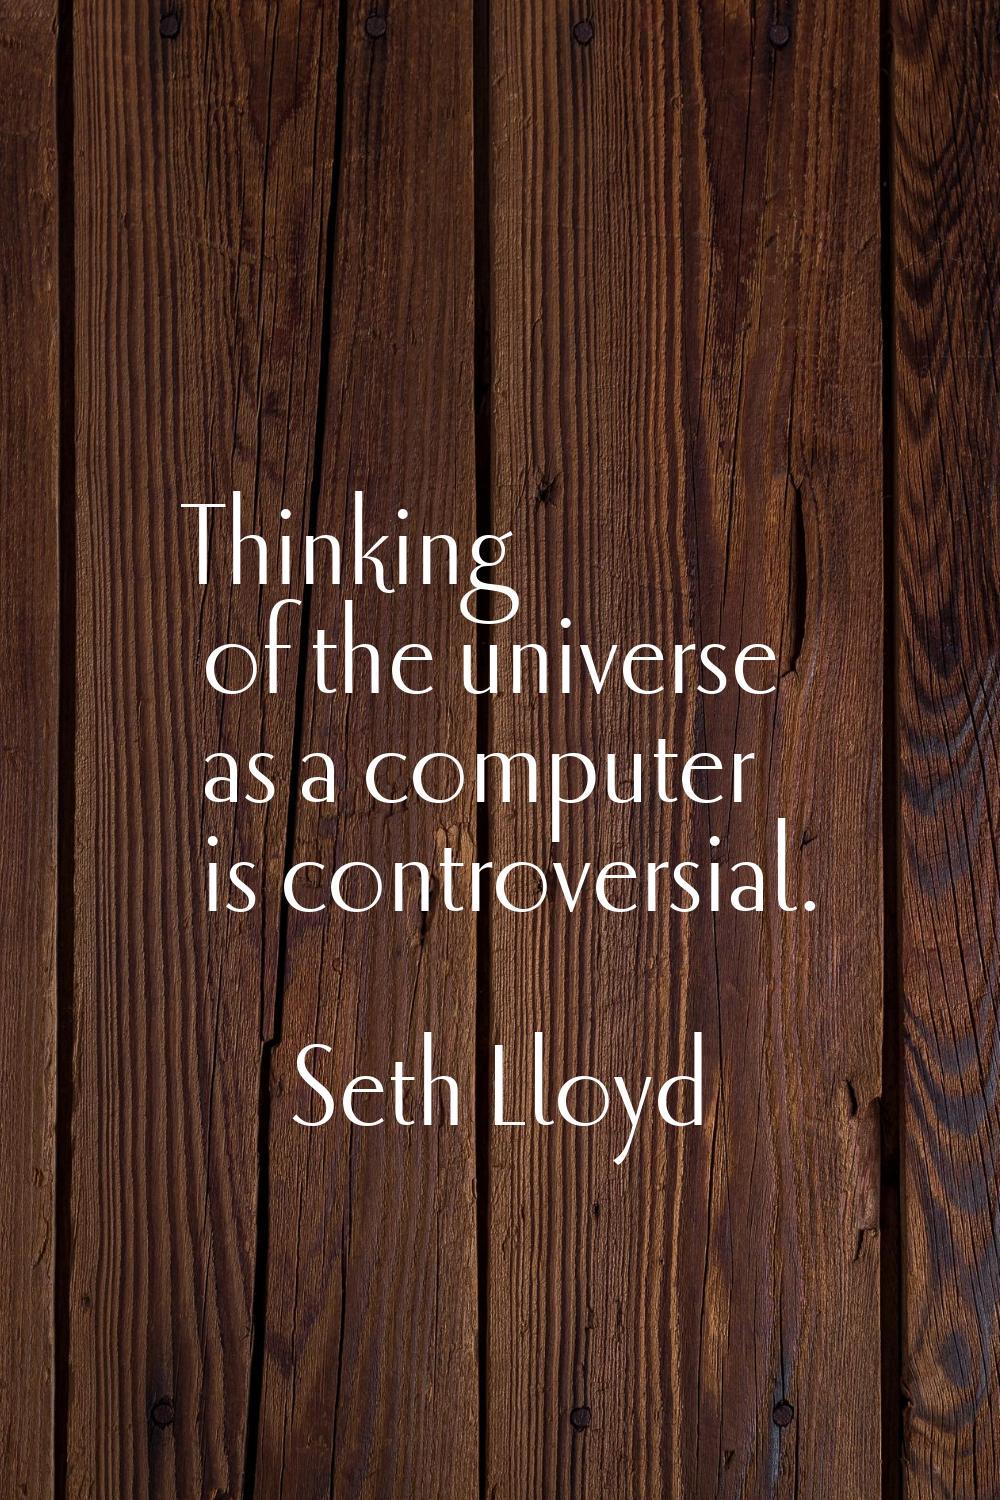 Thinking of the universe as a computer is controversial.